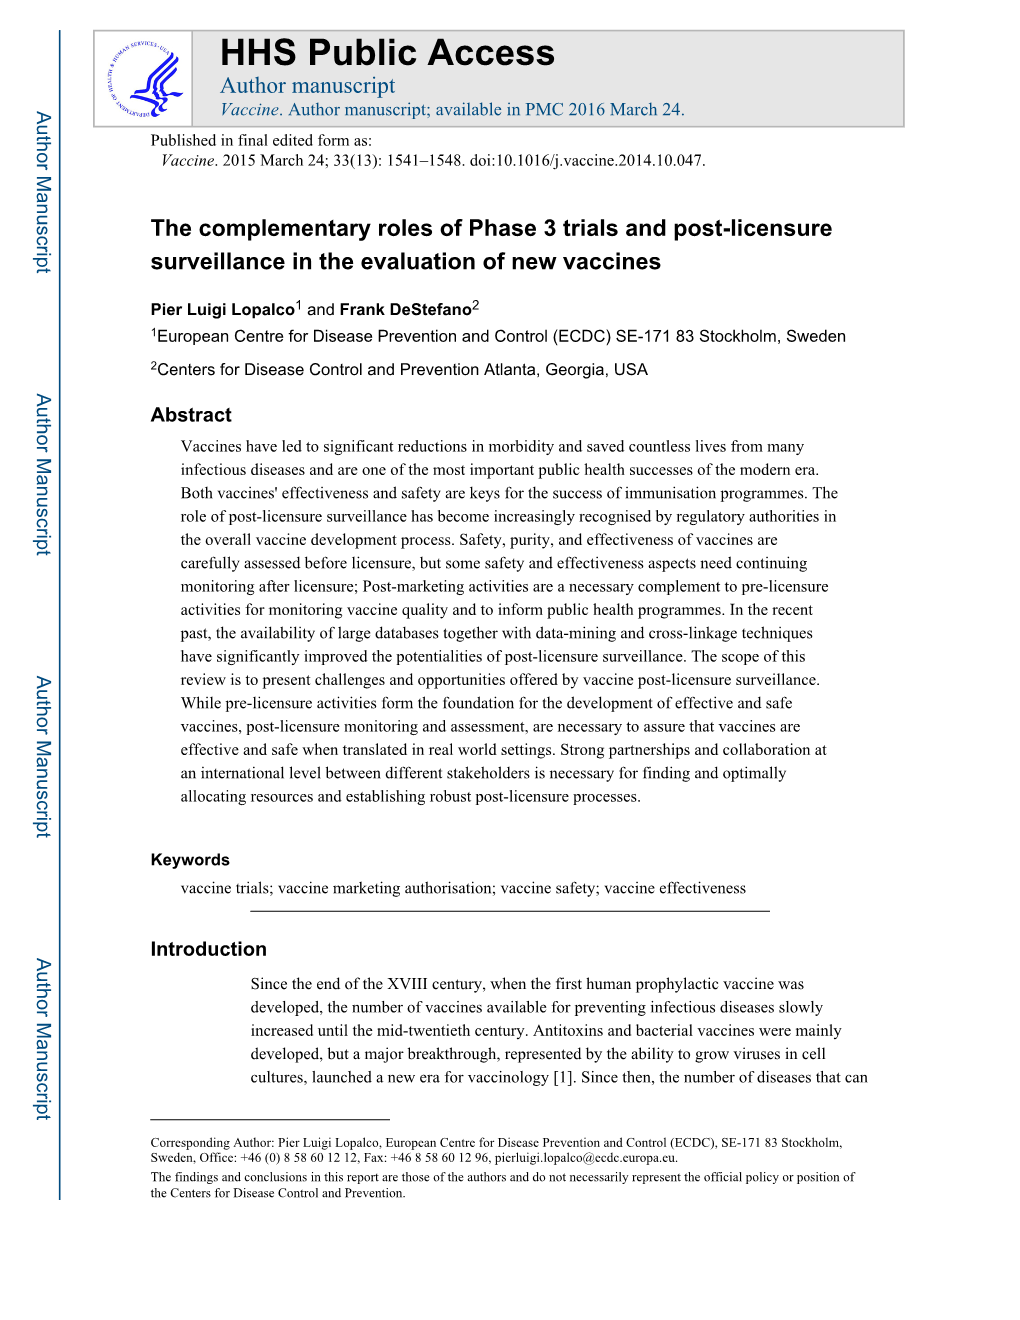 The Complementary Roles of Phase 3 Trials and Post-Licensure Surveillance in the Evaluation of New Vaccines